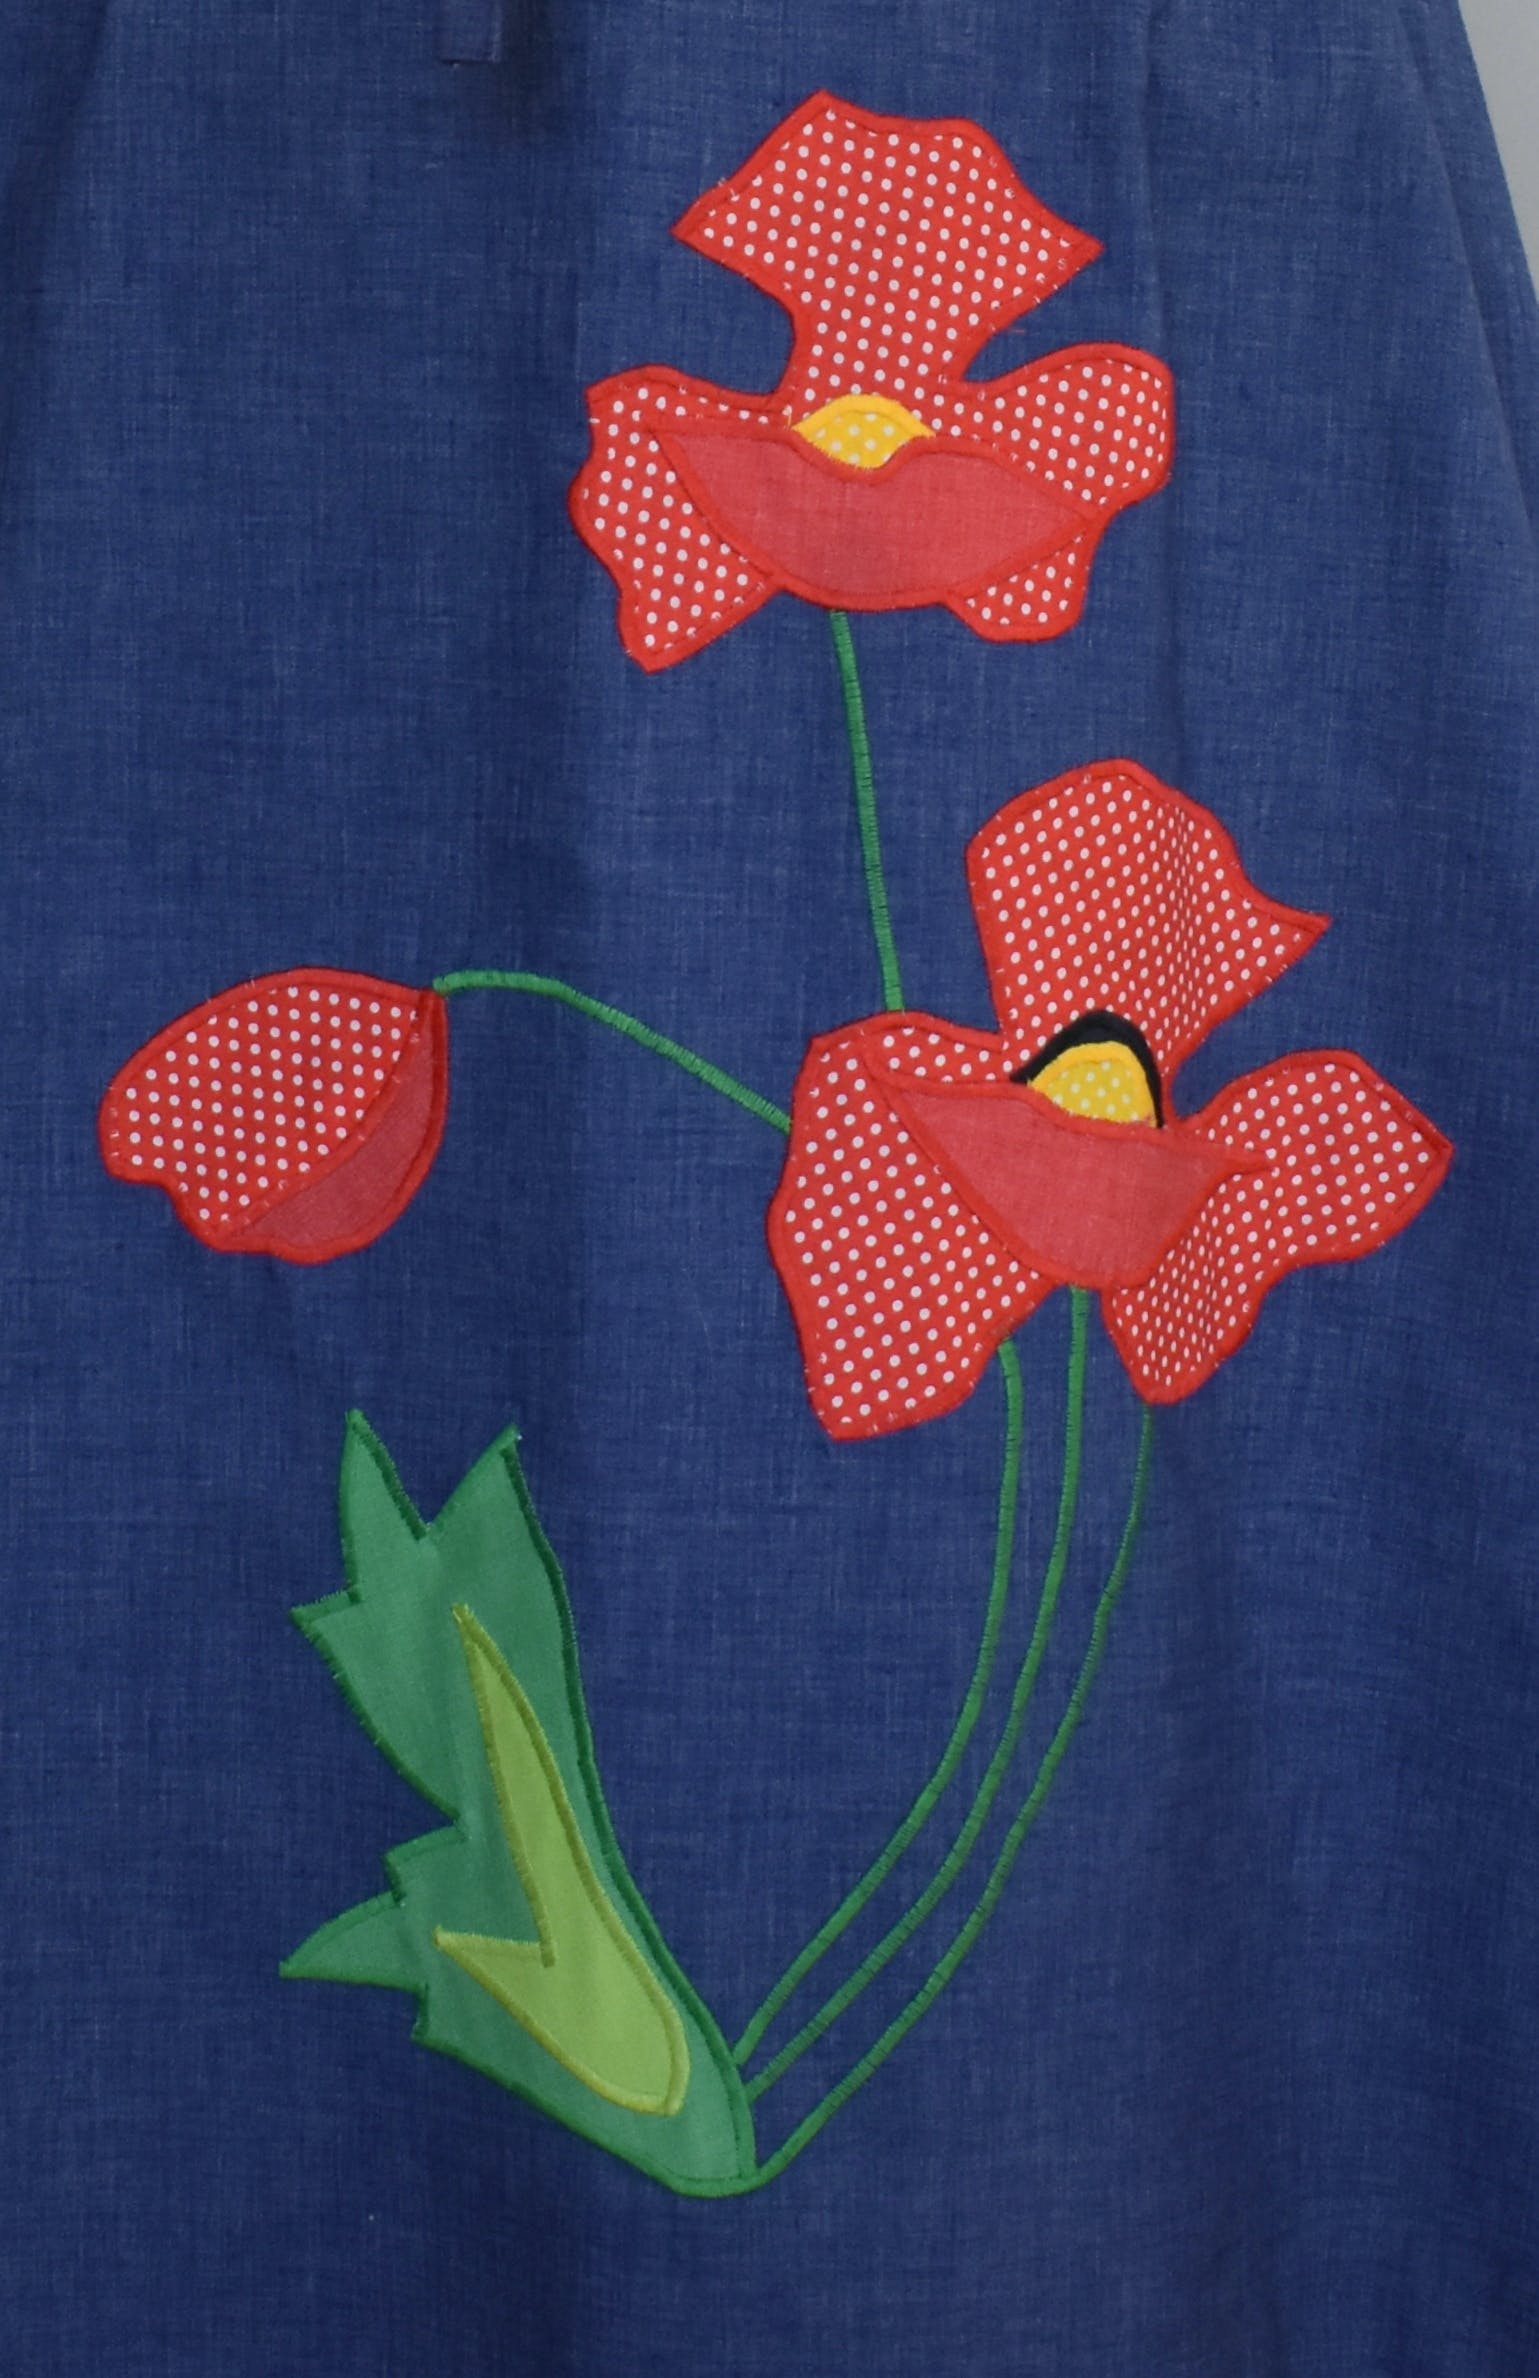 Vintage 70's Blue Chambray with Red Floral Applique Reverses to